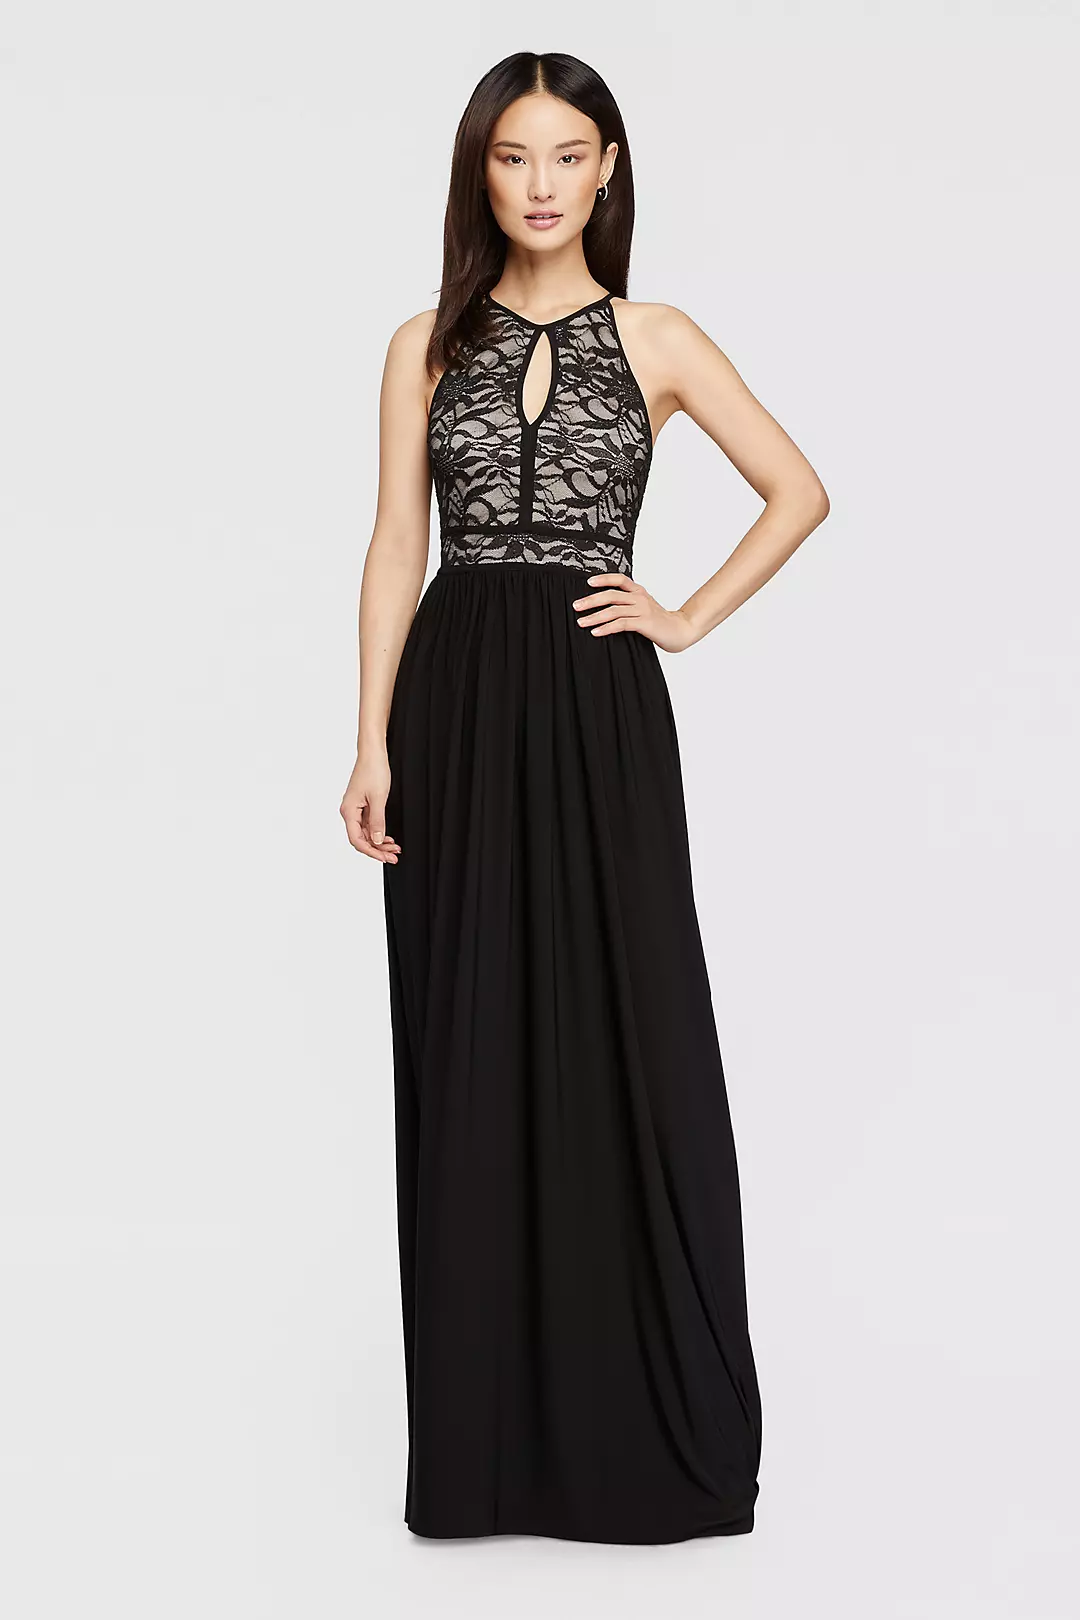 Lace Keyhole Halter Dress with Jersey Skirt Image